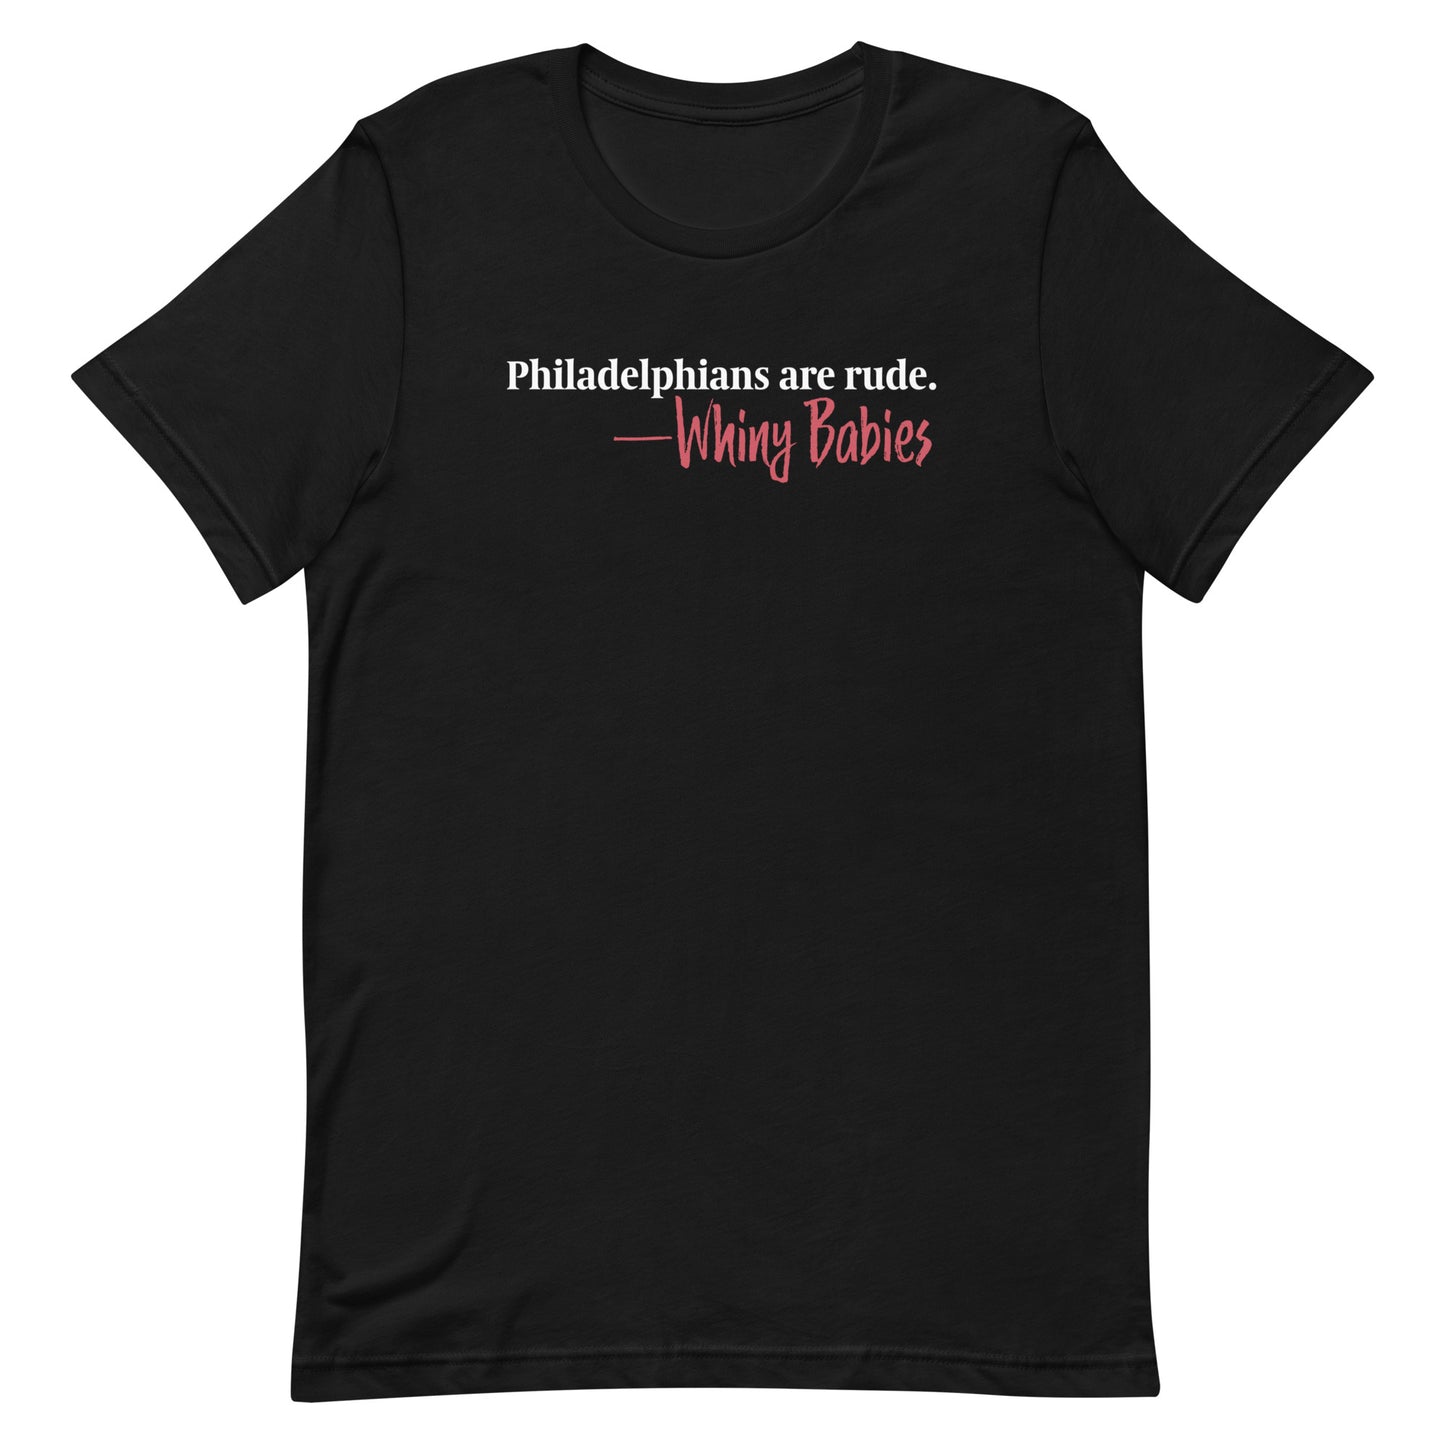 Are Philadelphians Rude? Only If You're A Whiny Baby - Unisex T-Shirt